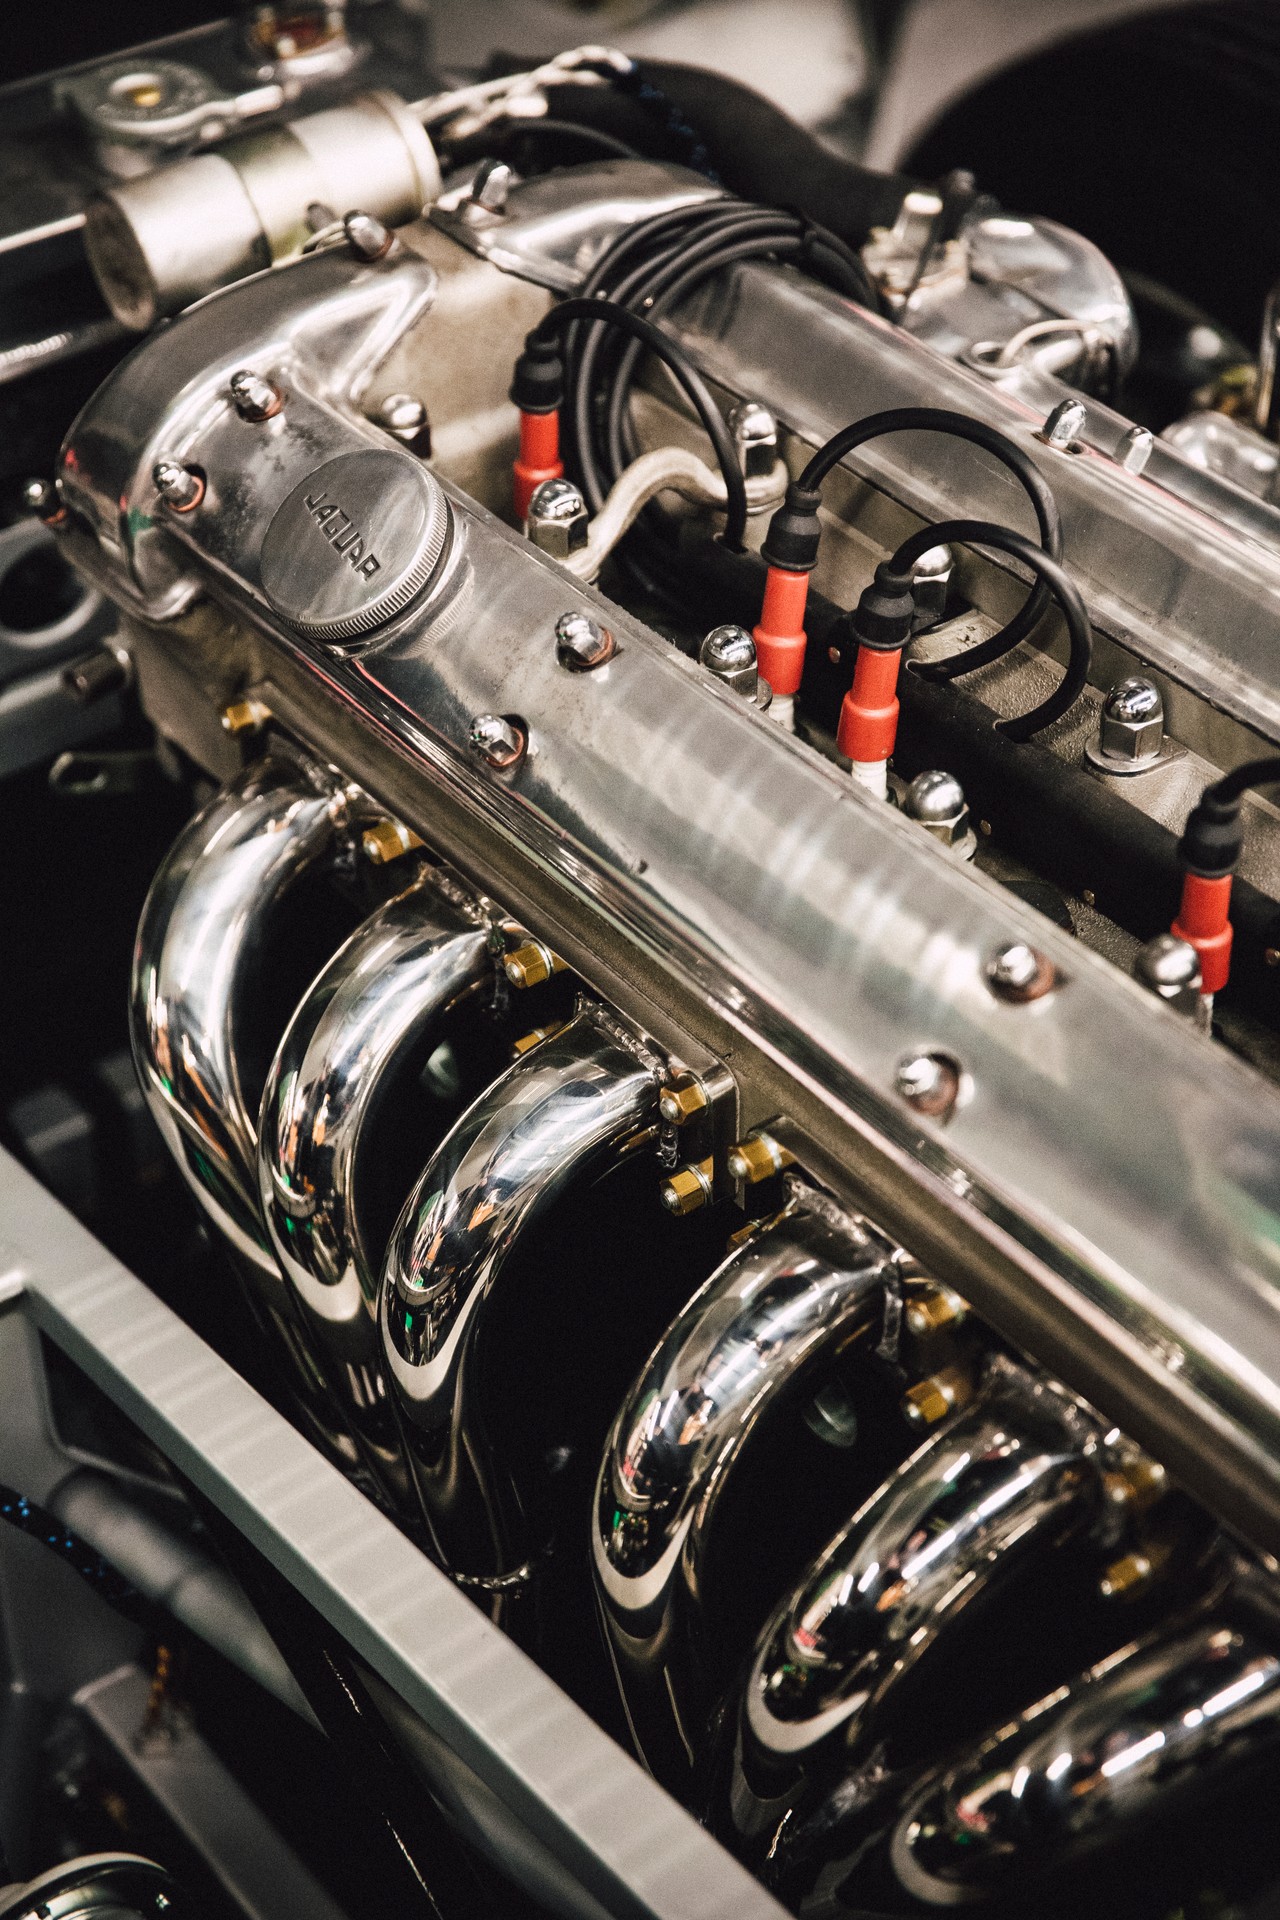 How JavaScript Works: Under the Hood of the V8 Engine